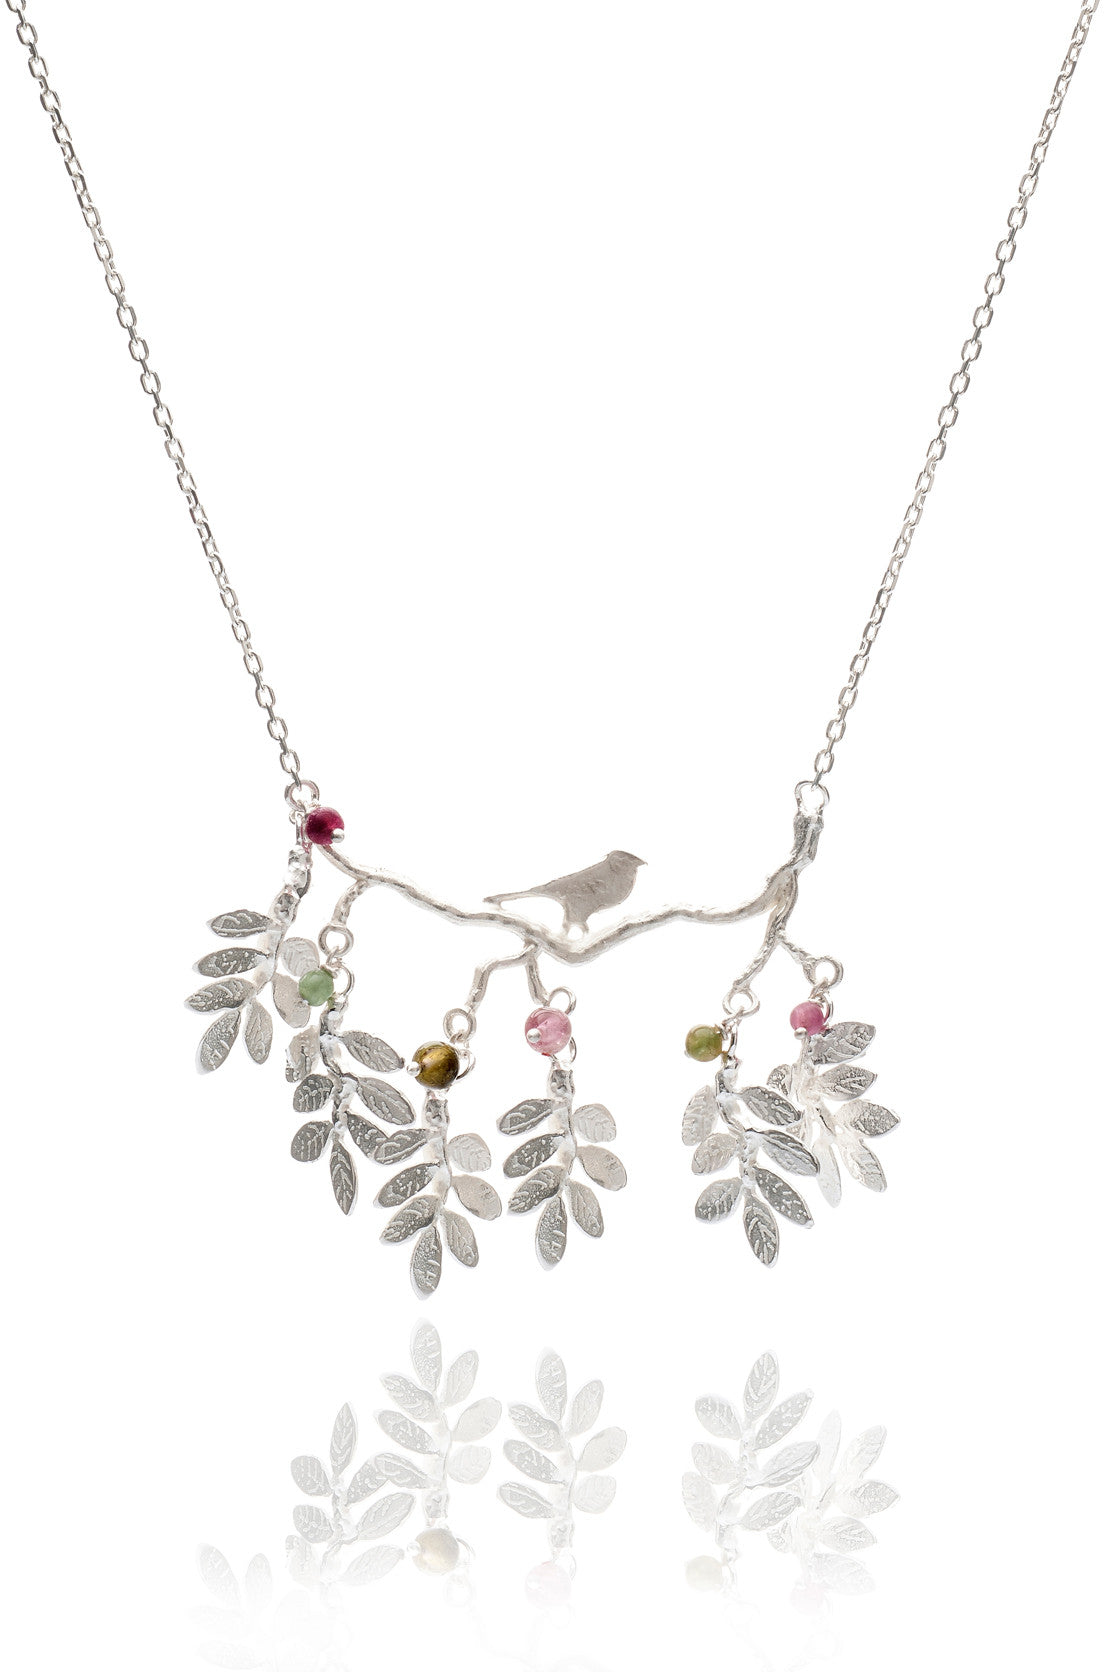 Sterling silver necklace with dangling leaves and silver bird pendant